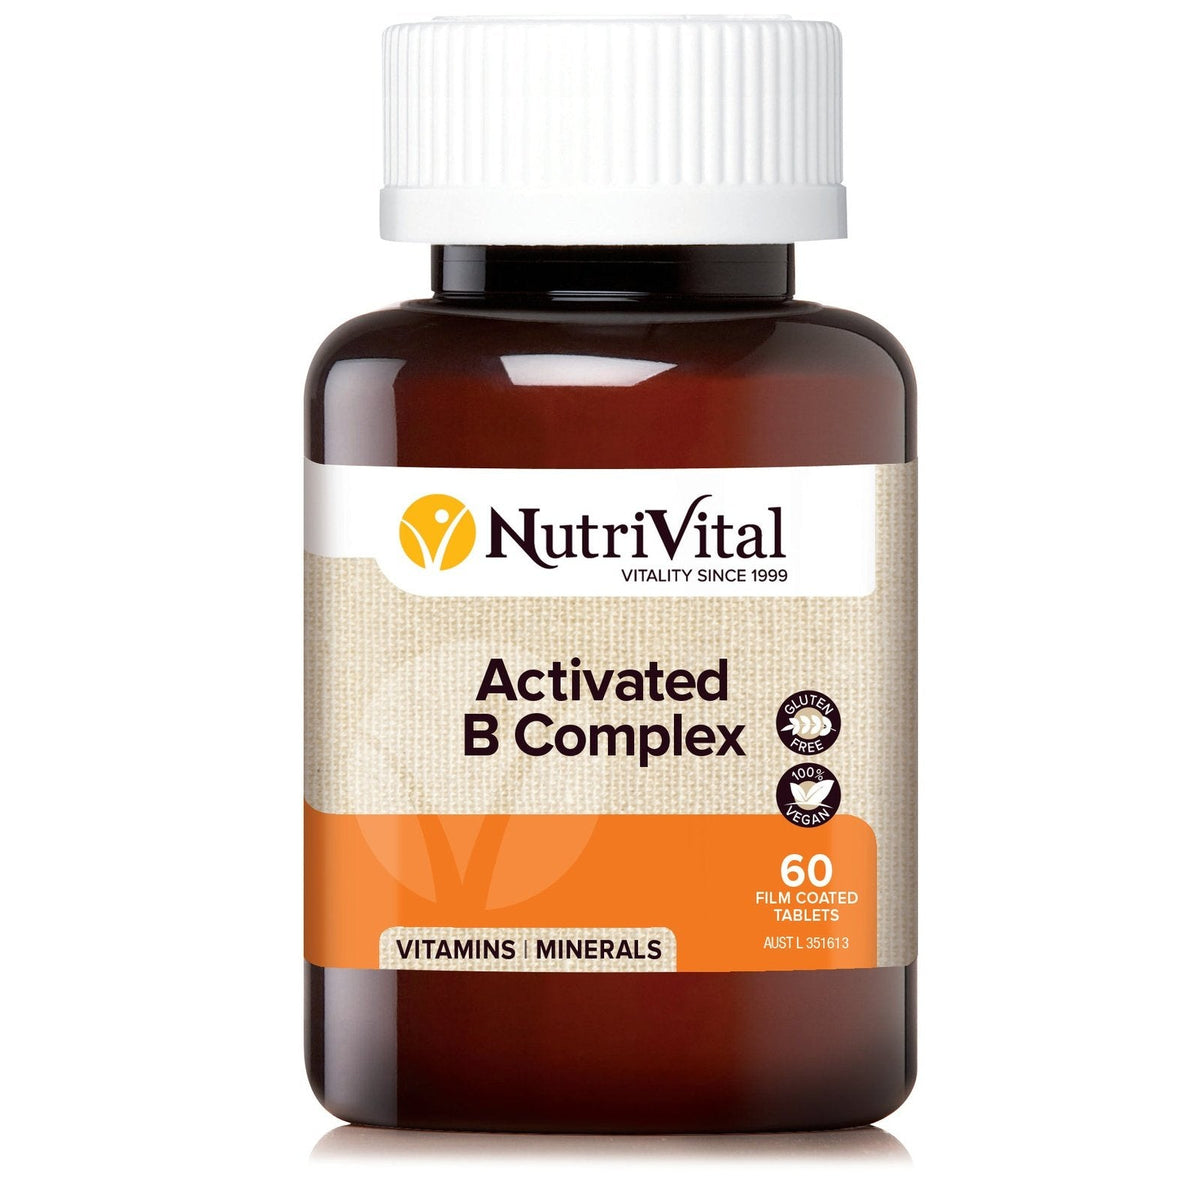 NutriVital Activated B Complex 60 Tablets